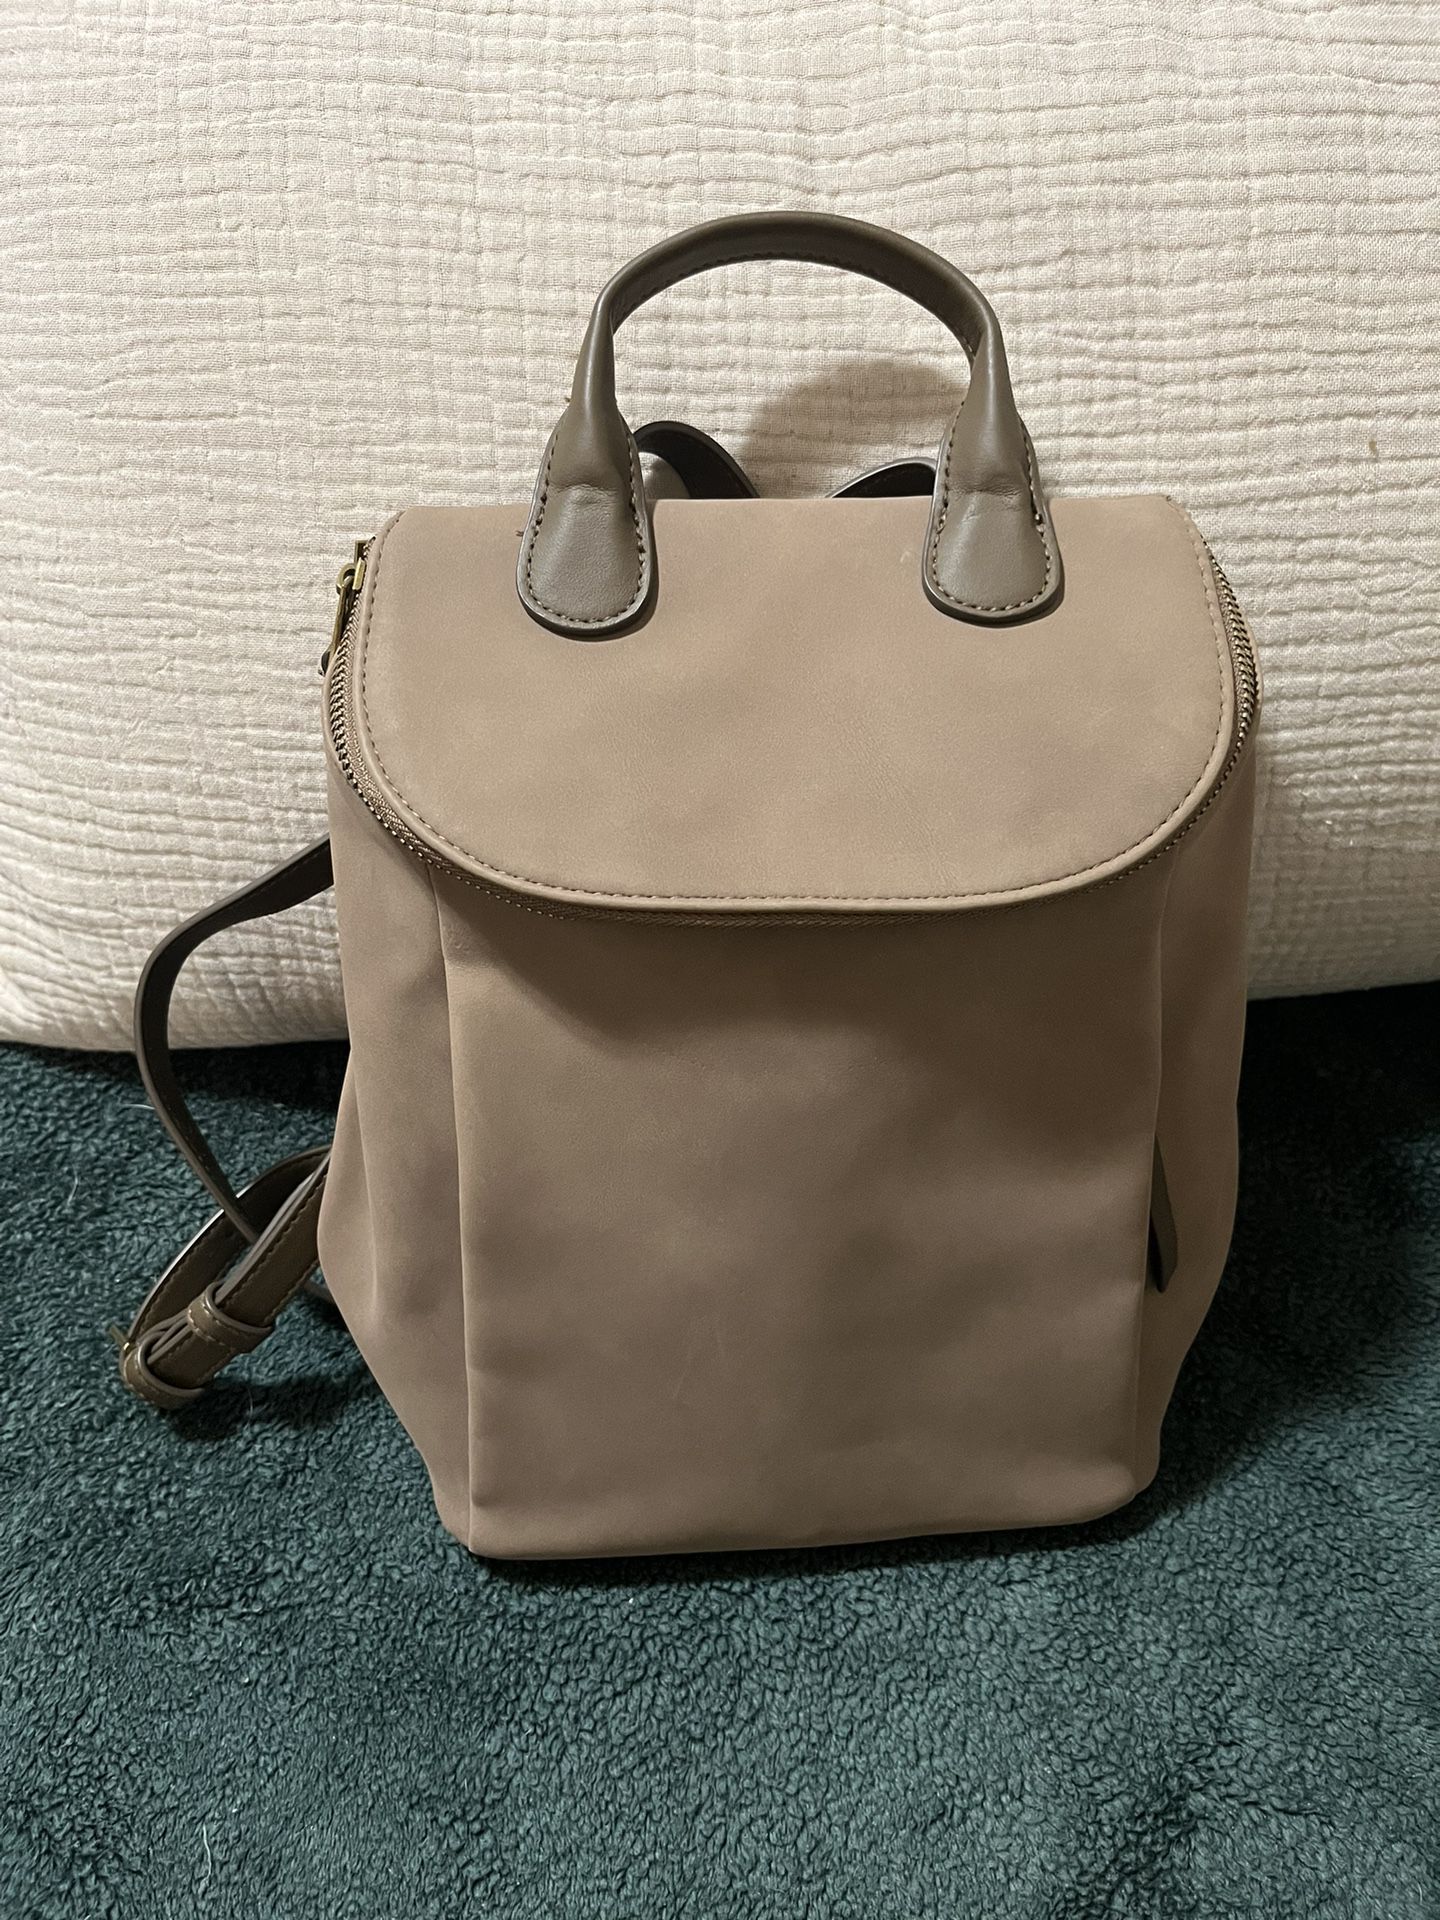 Women's Bag with wallet for Sale in Bakersfield, CA - OfferUp